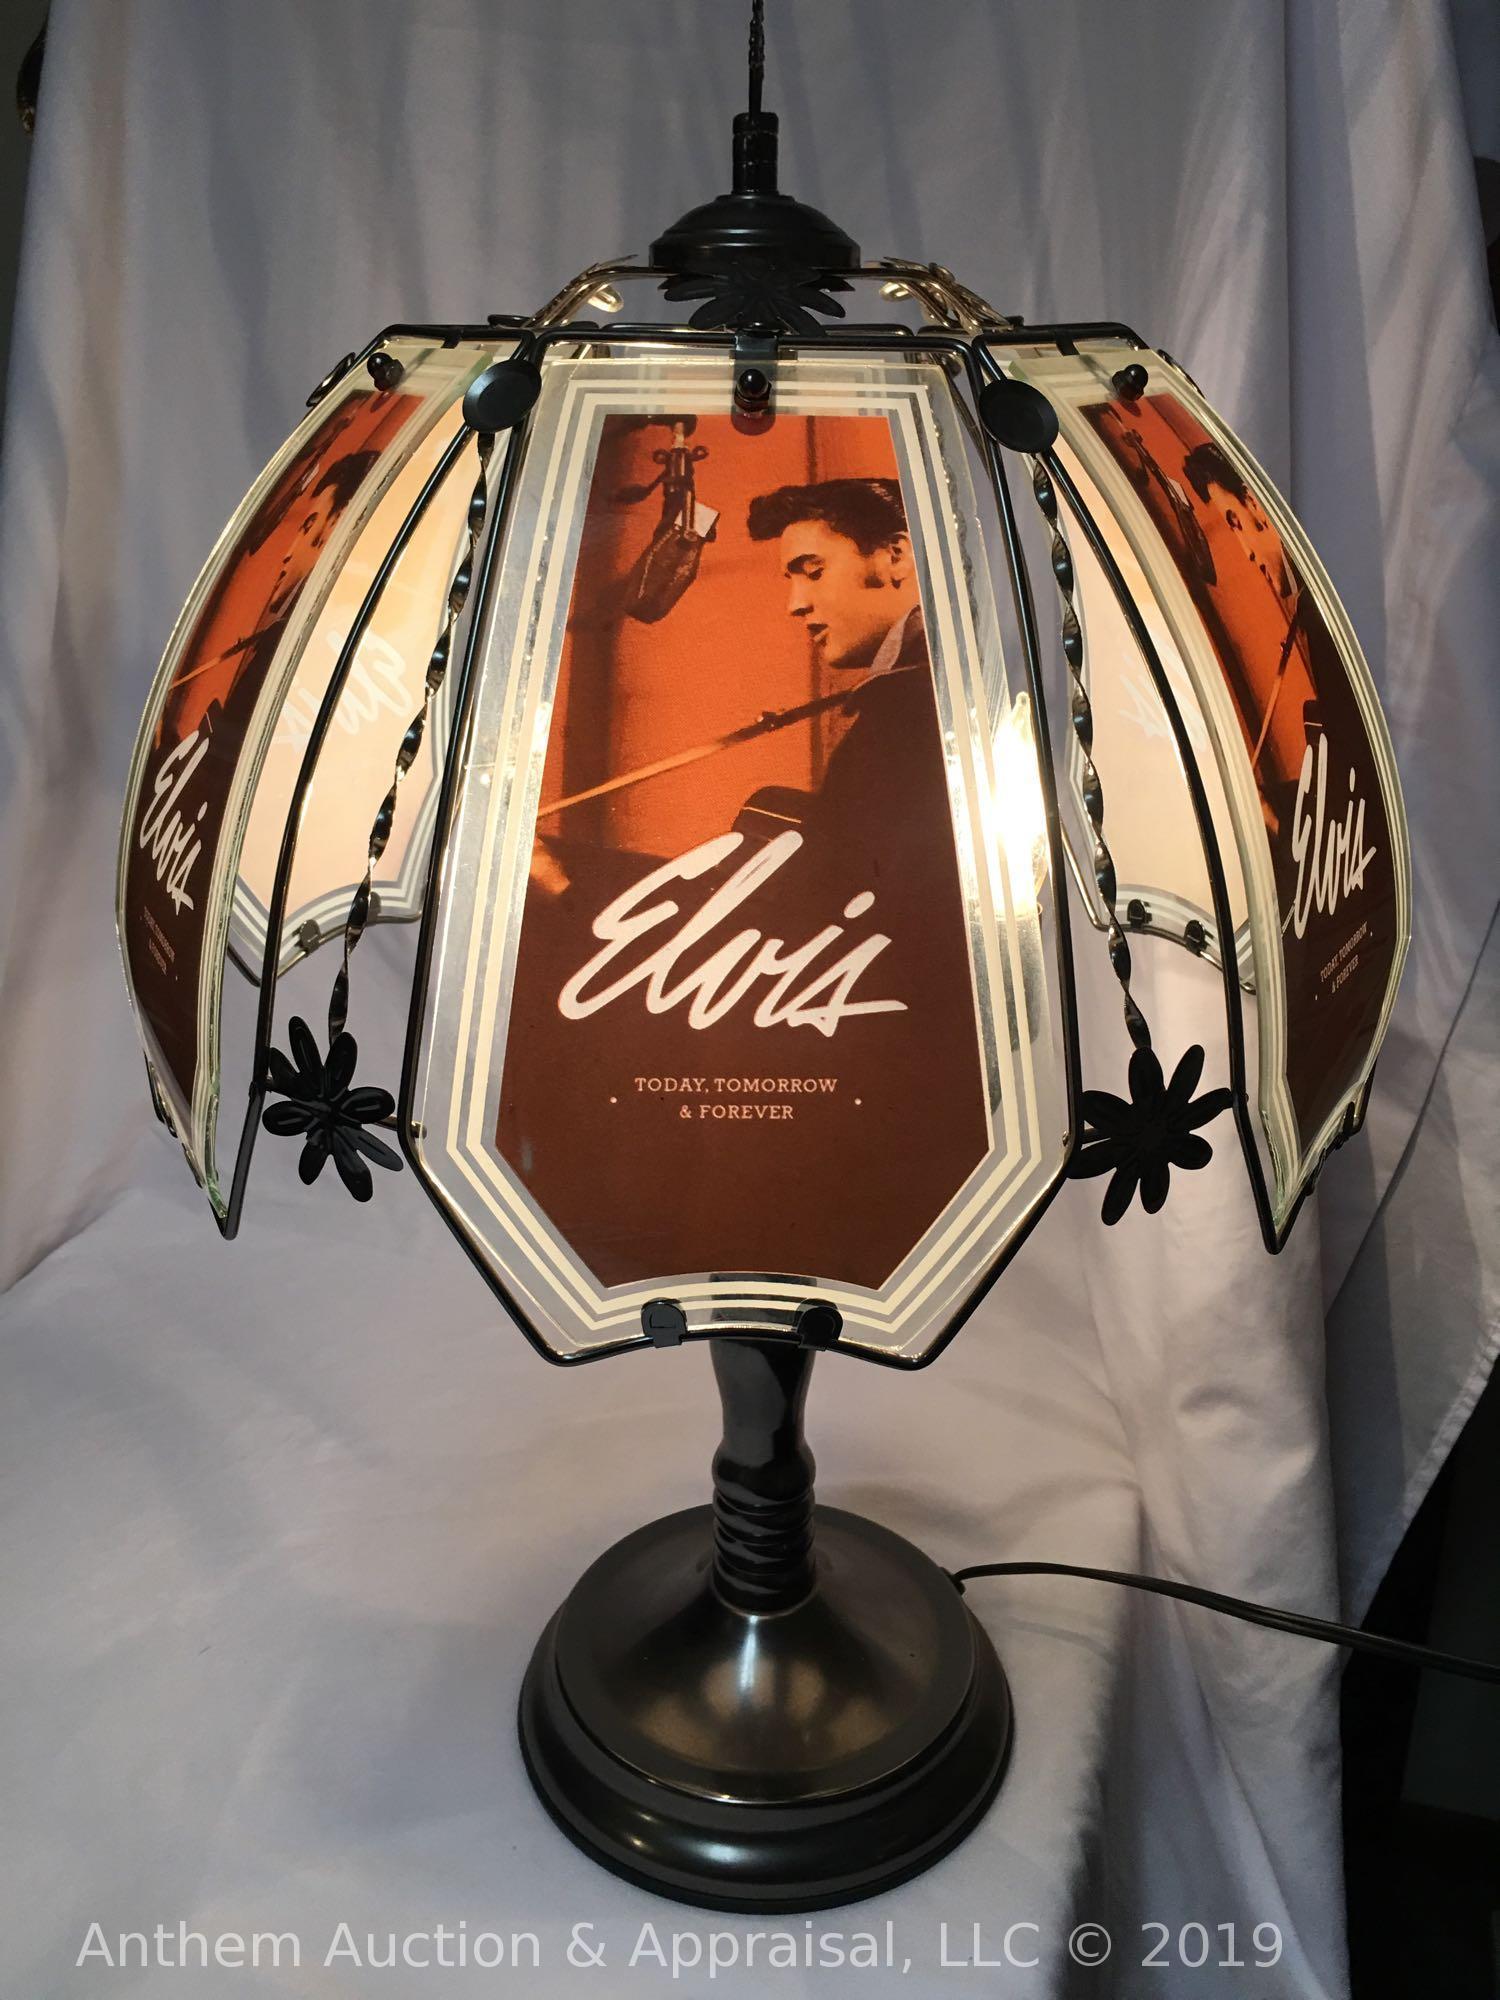 Elvis Presley "Today, Tomorrow, and Forever" glass panels plug-in lamp. Working condition!